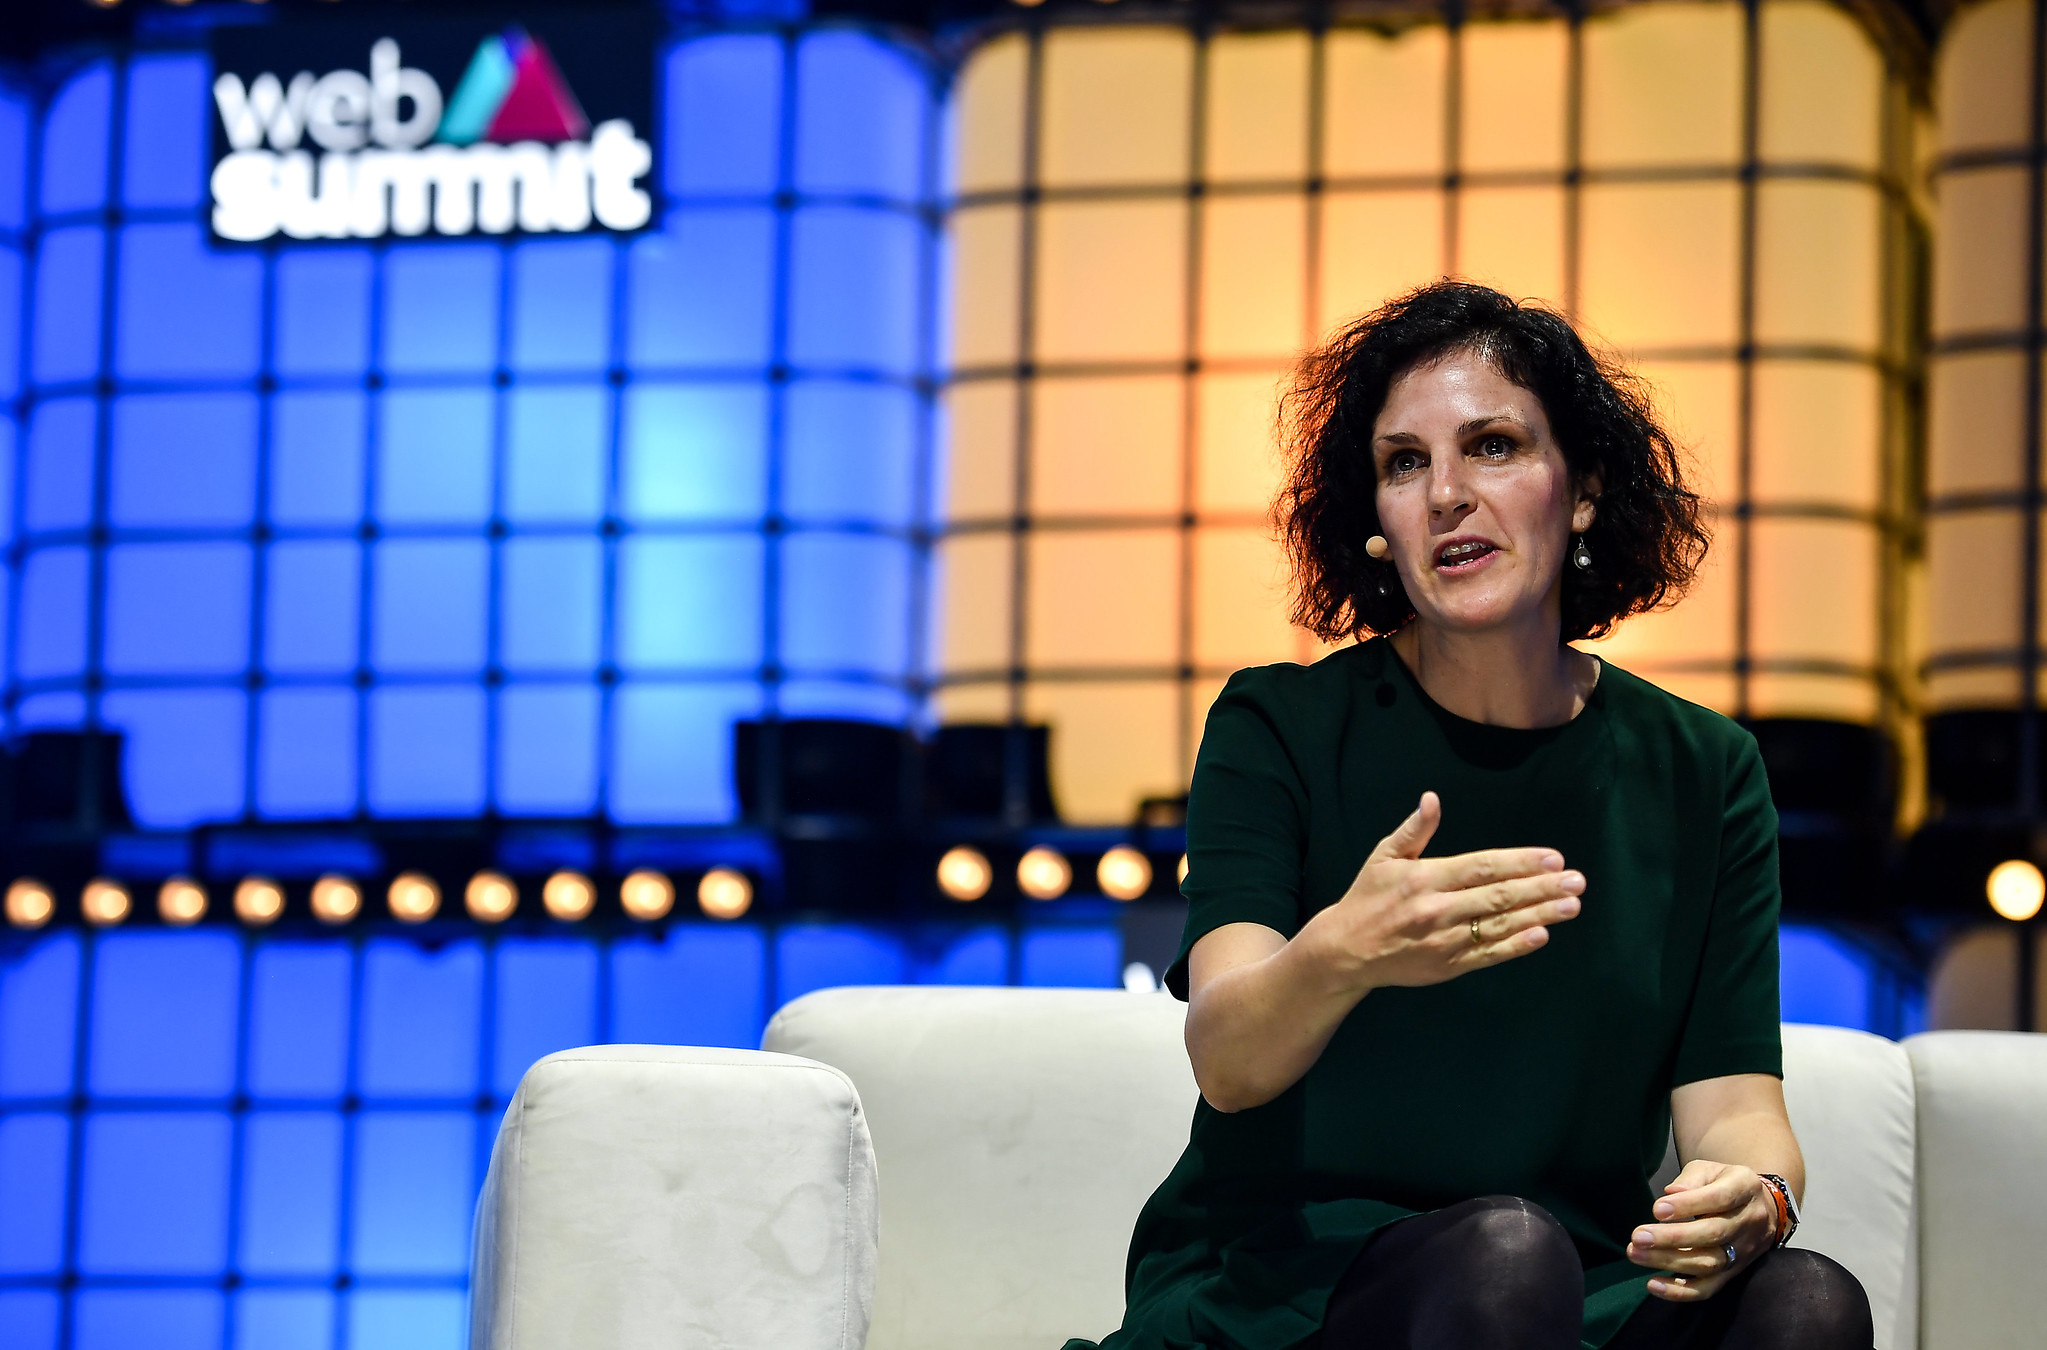 A photograph of Barbara Martin Coppola, former chief digital officer of IKEA, speaking on Centre Stage at Web Summit. Barbara is sitting on a chair and appears to be speaking. Barbara is gesturing with hands to speak and appears to be wearing an on-ear microphone. The Web Summit logo is visible in the background.